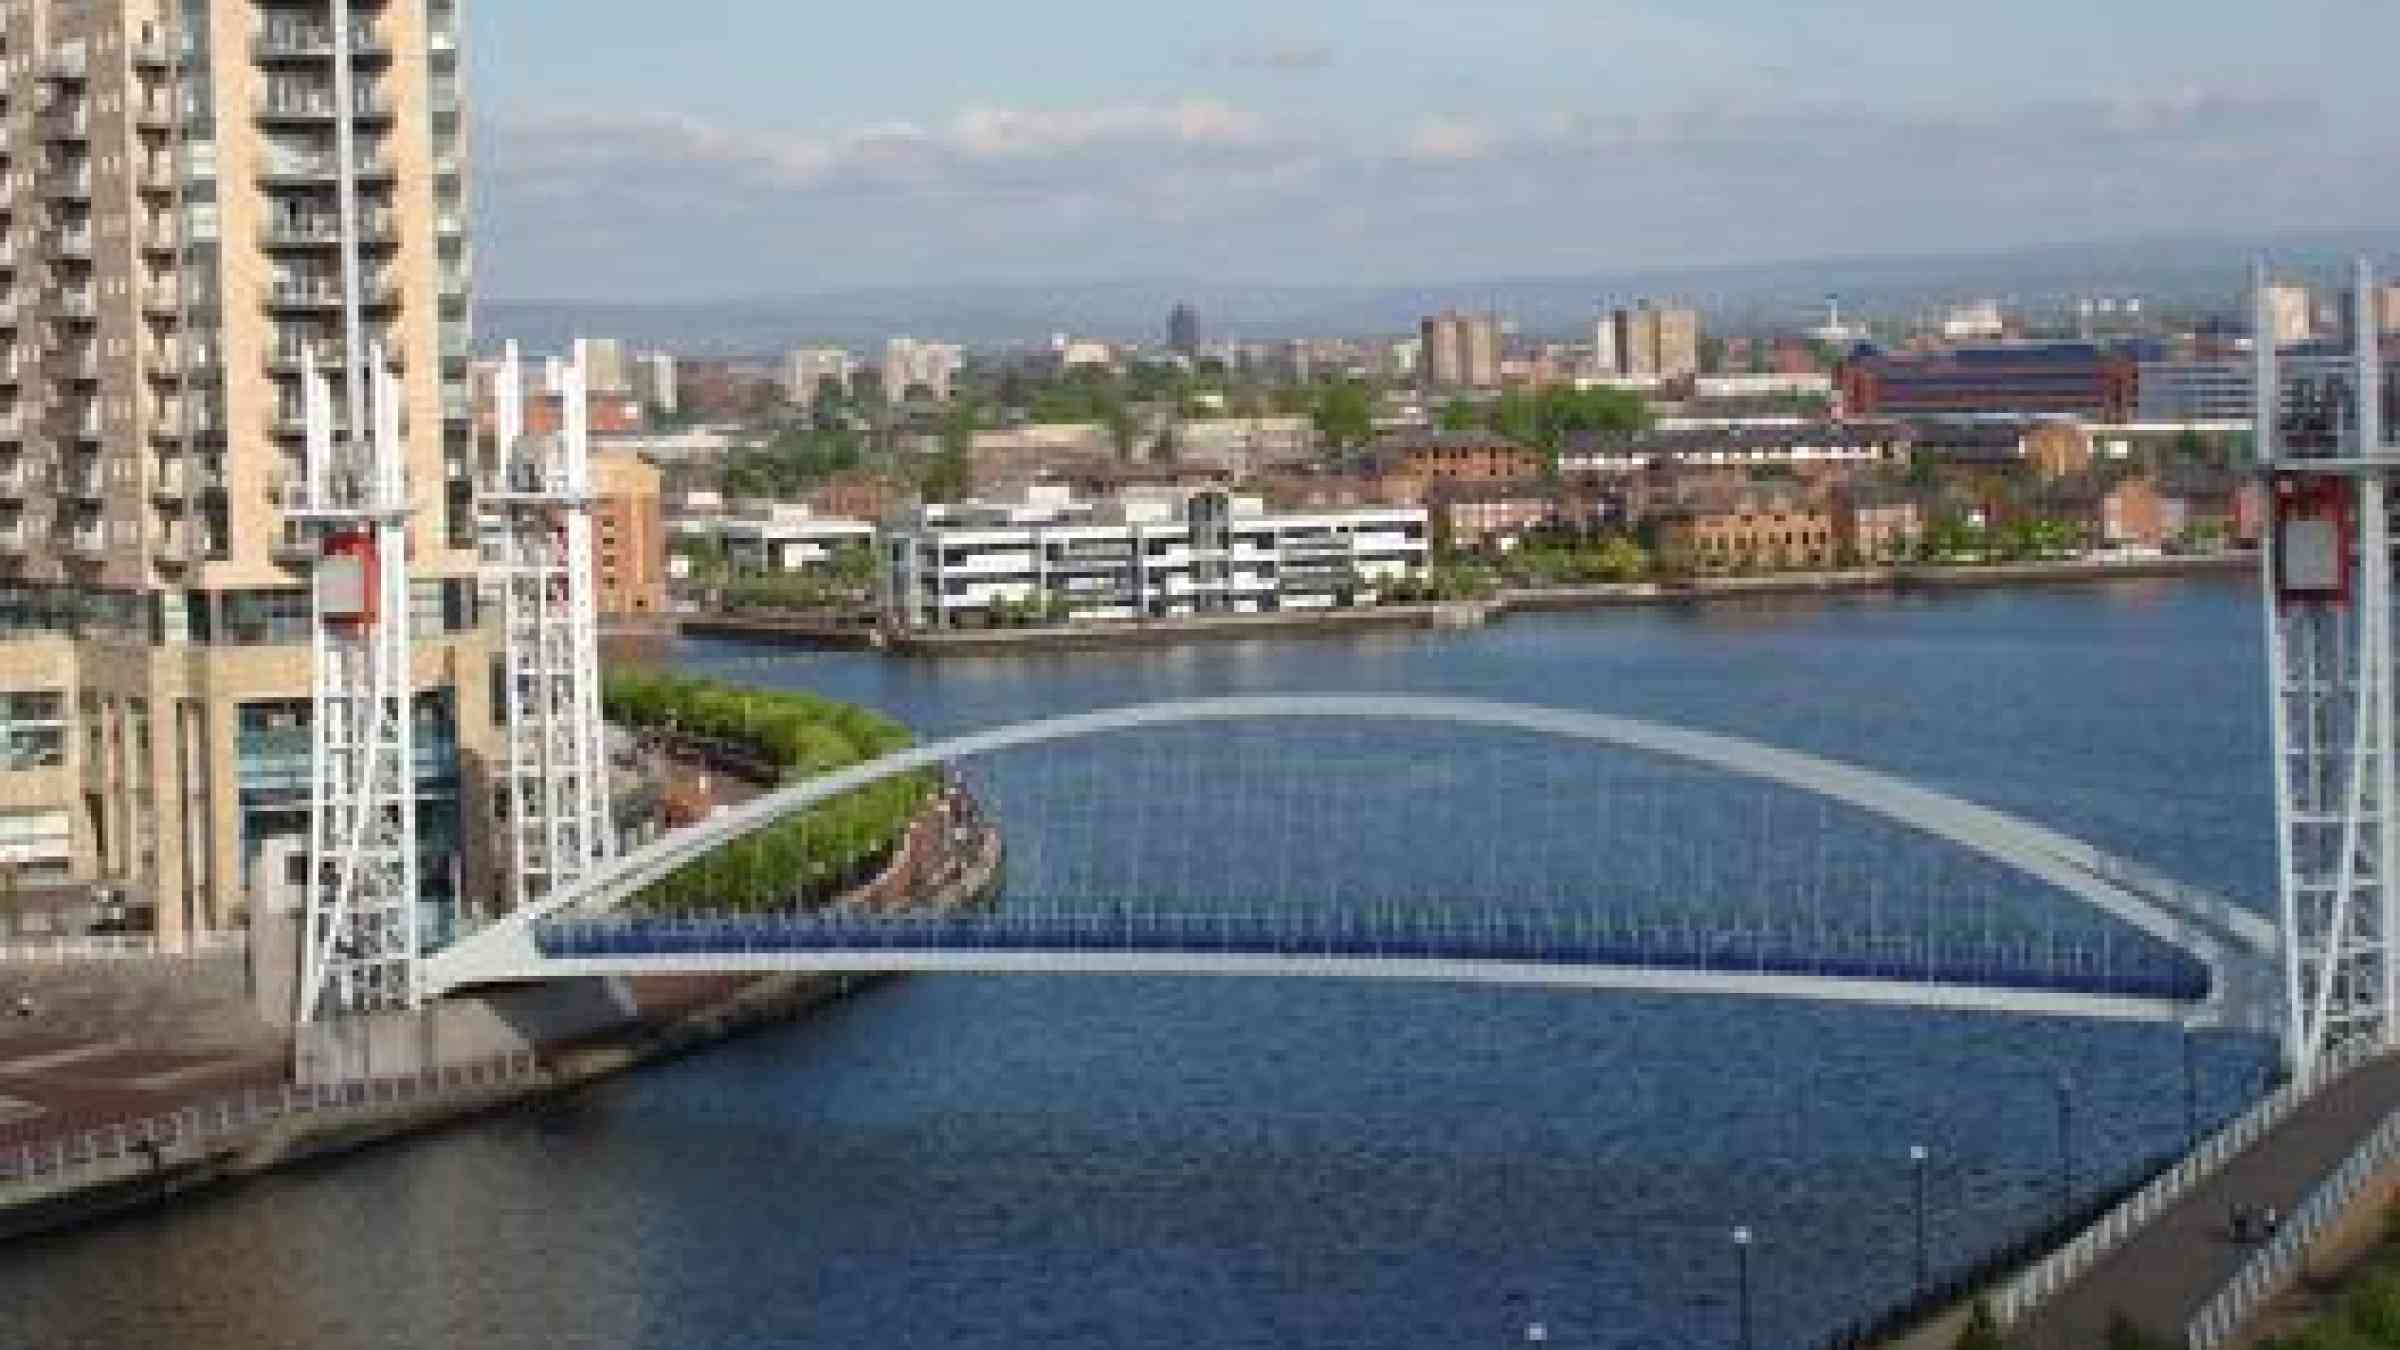 Salford Quays, UK where this week's International Conference on Resilience is taking place. (Photo: UNISDR)